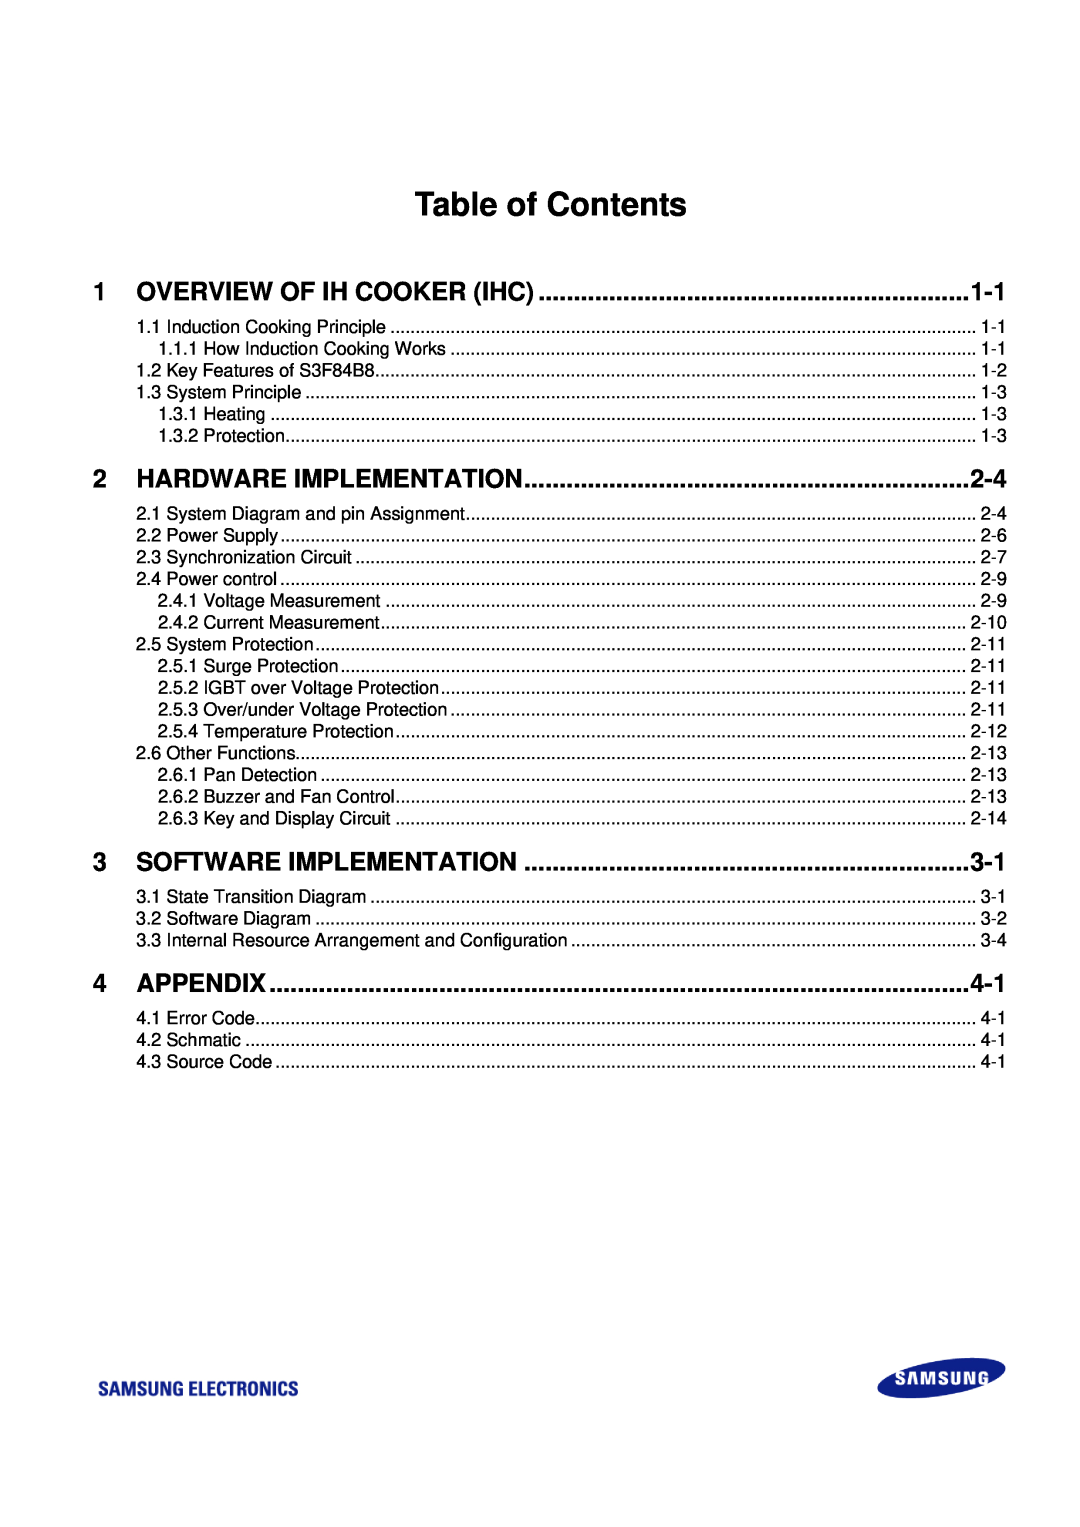 Samsung S3F84B8 Table of Contents, Overview Of Ih Cooker Ihc, Hardware Implementation, Software Implementation, Appendix 